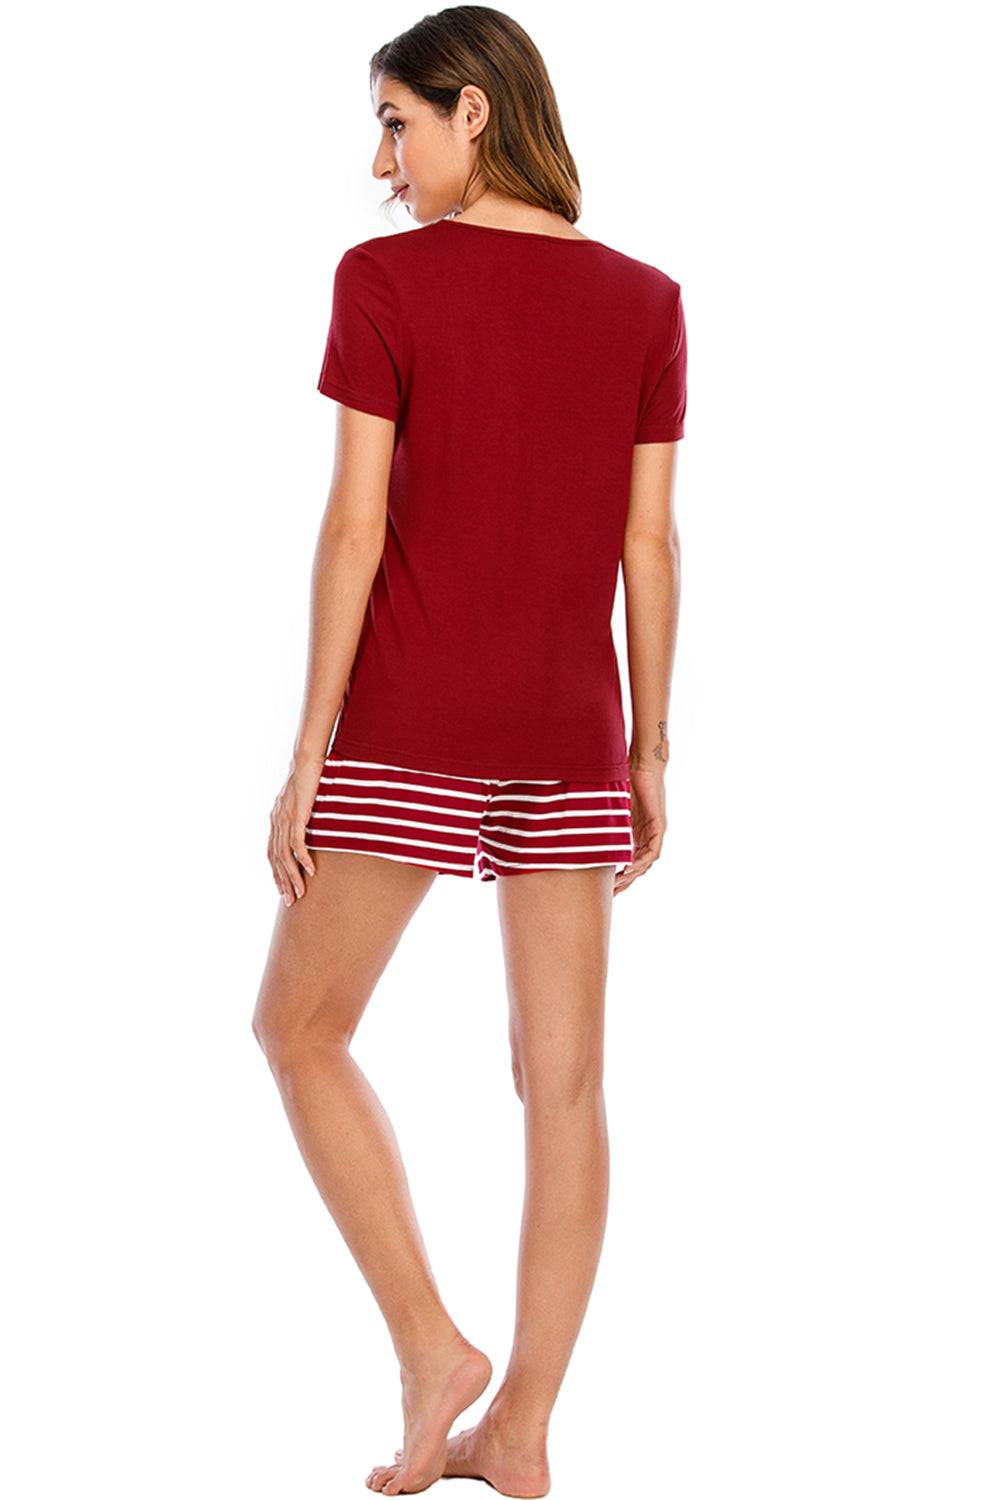 a woman in a red shirt and striped shorts